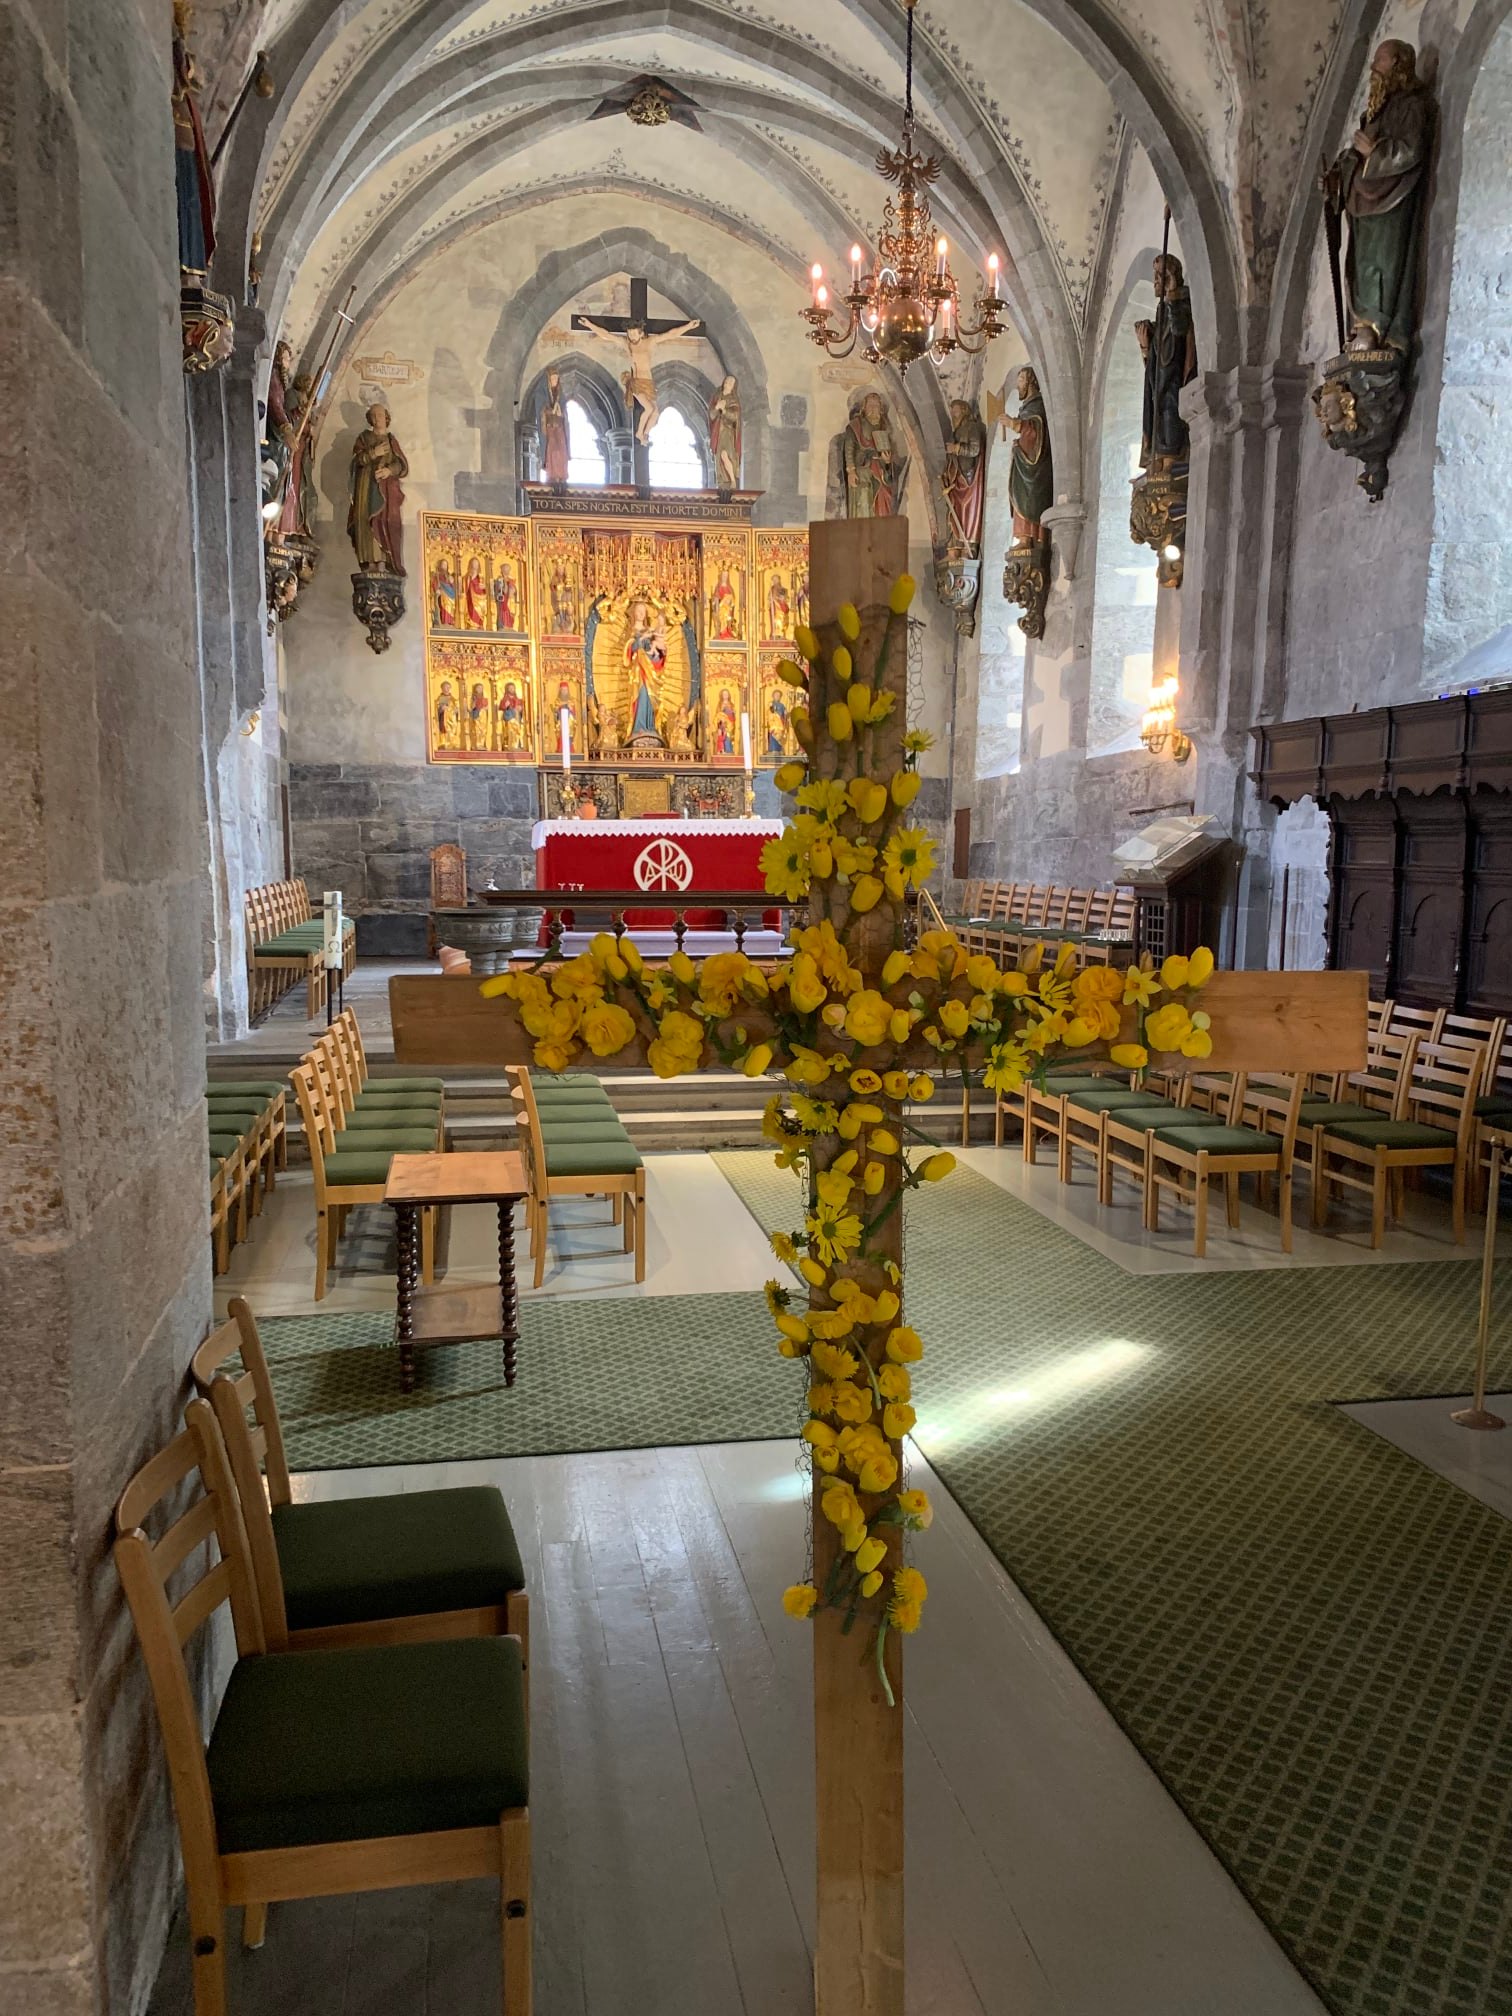 A cross covered in yellow flowers.